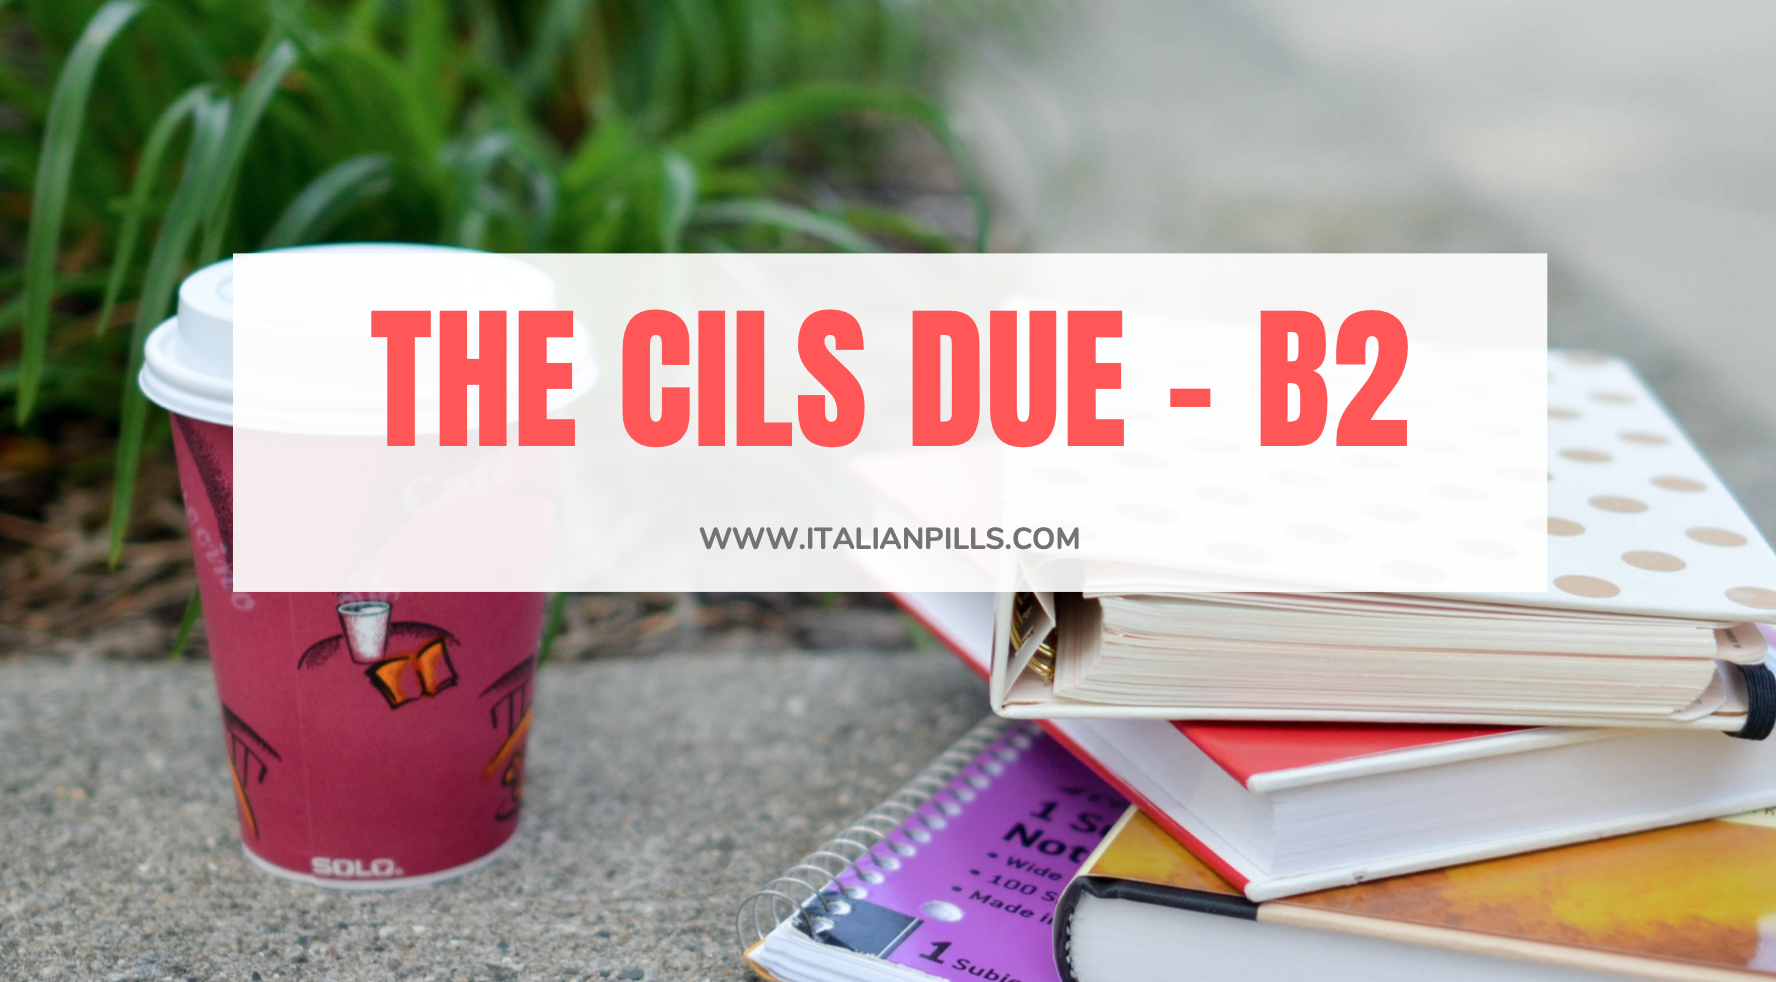 CILS Due B2 Exam: The Structure